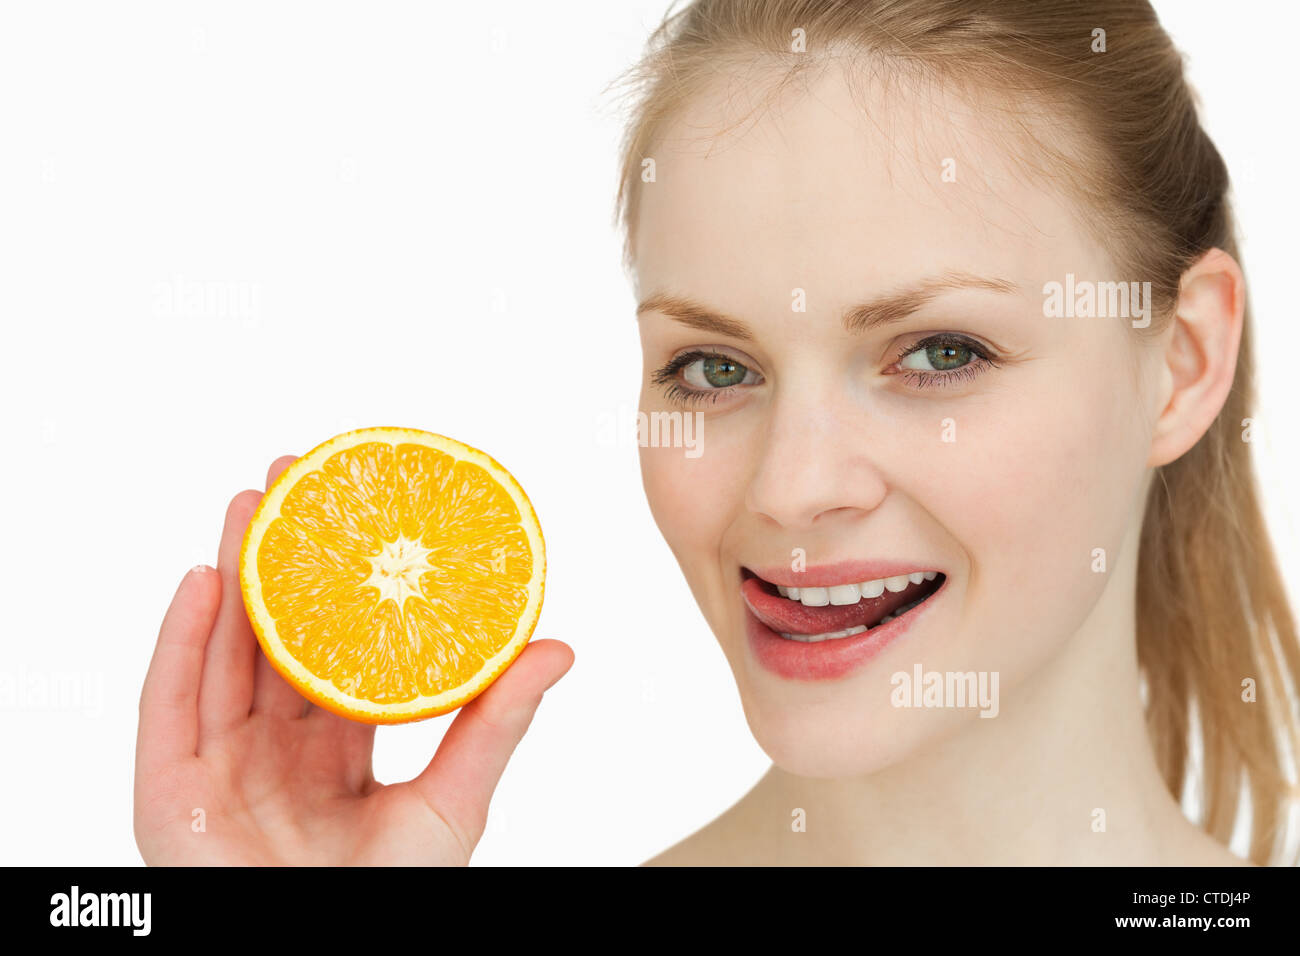 Woman holding an orange while placing her tongue on her lips Stock Photo